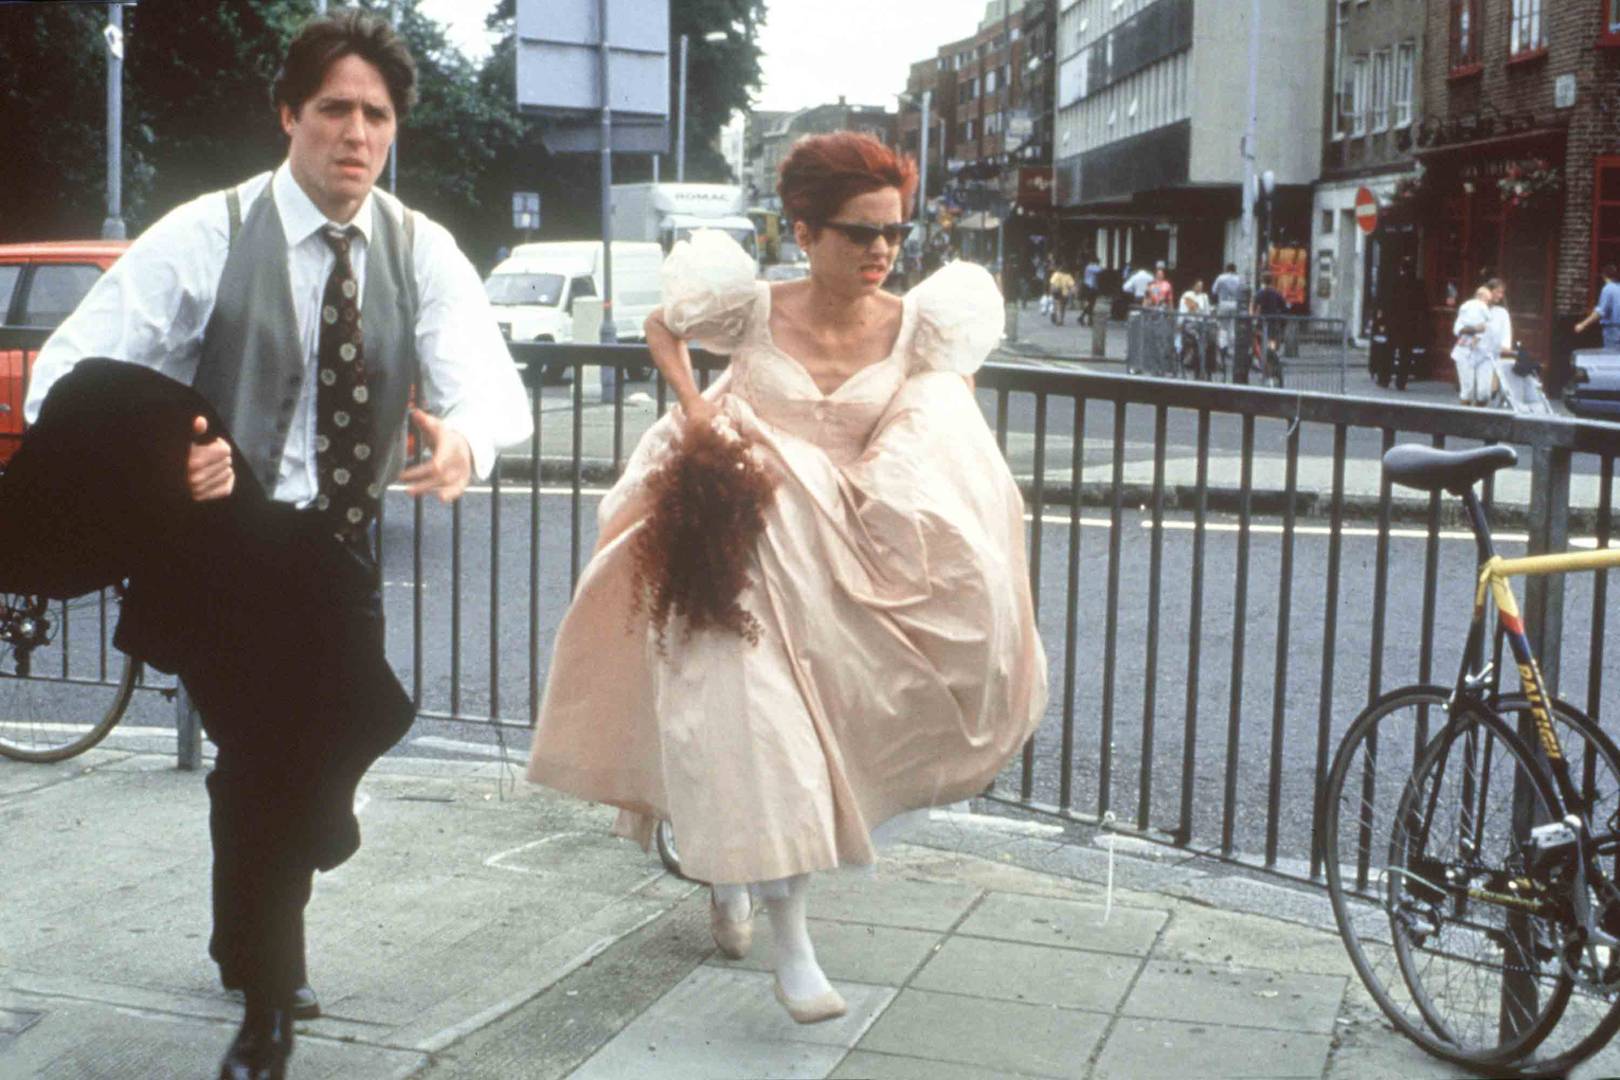 Four Weddings and a Funeral filming locations you can